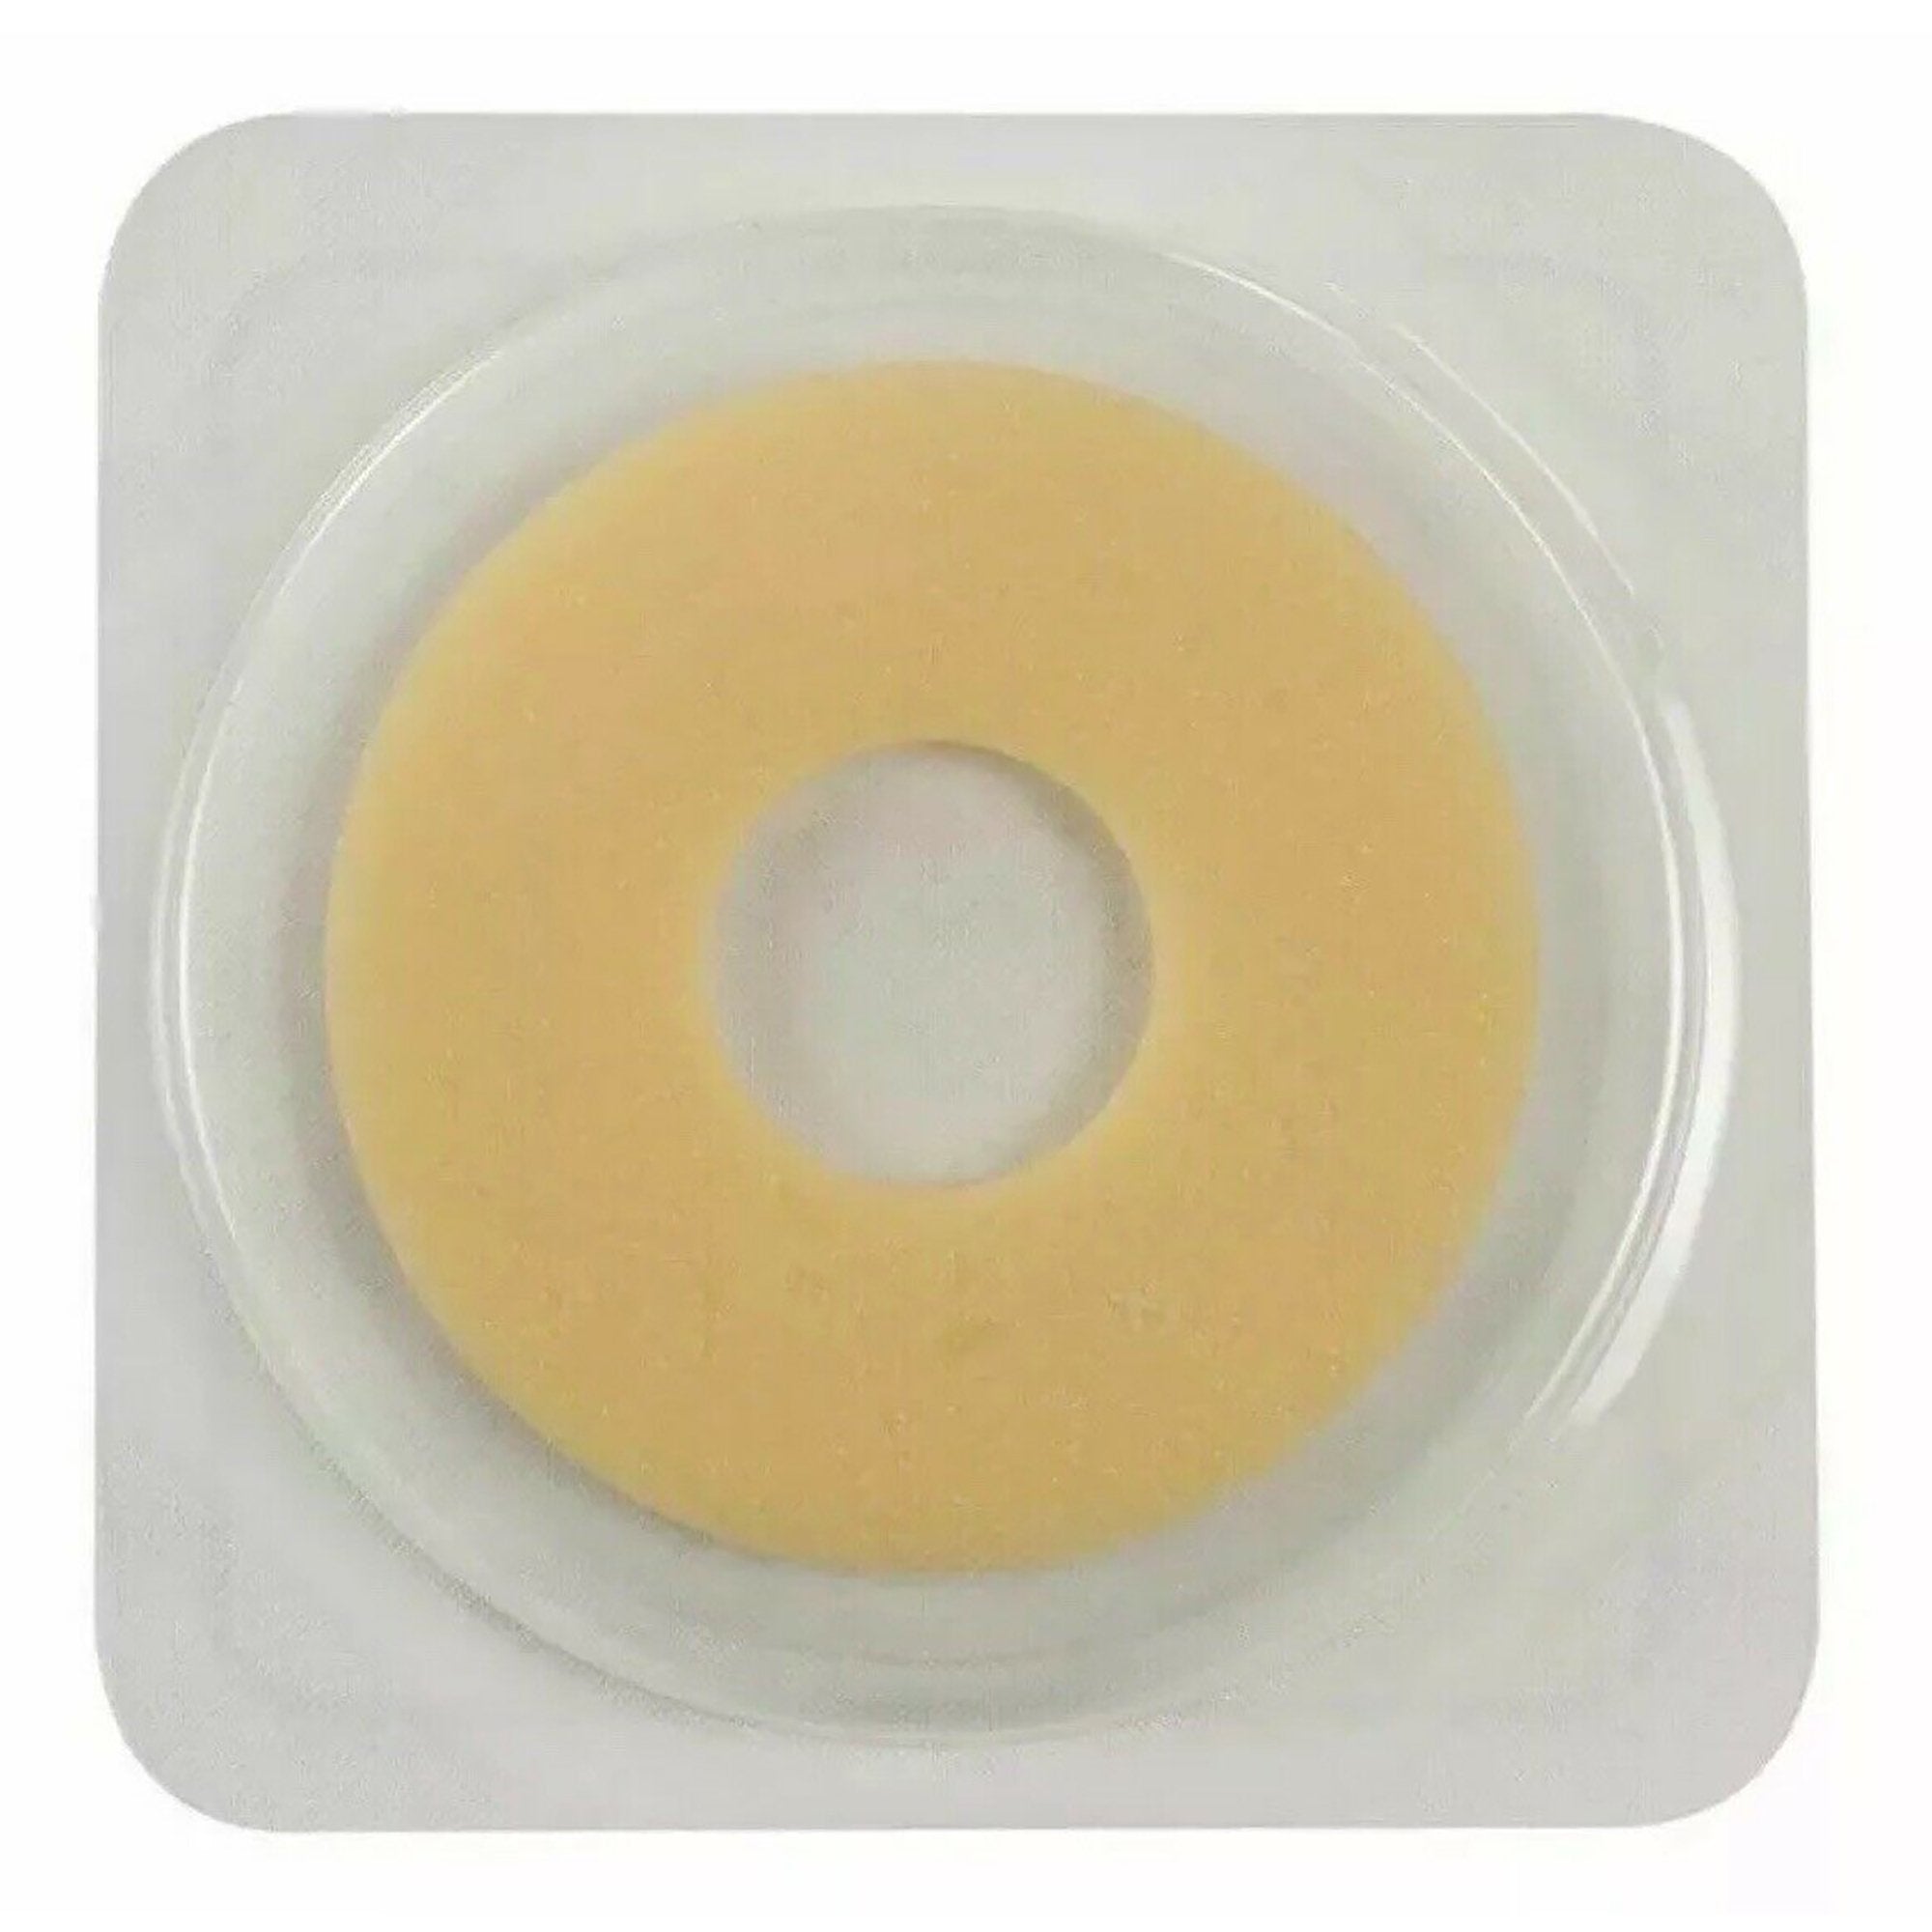 Barrier Ring Seal Eakin Cohesive® 2 Inch, Small, Skin